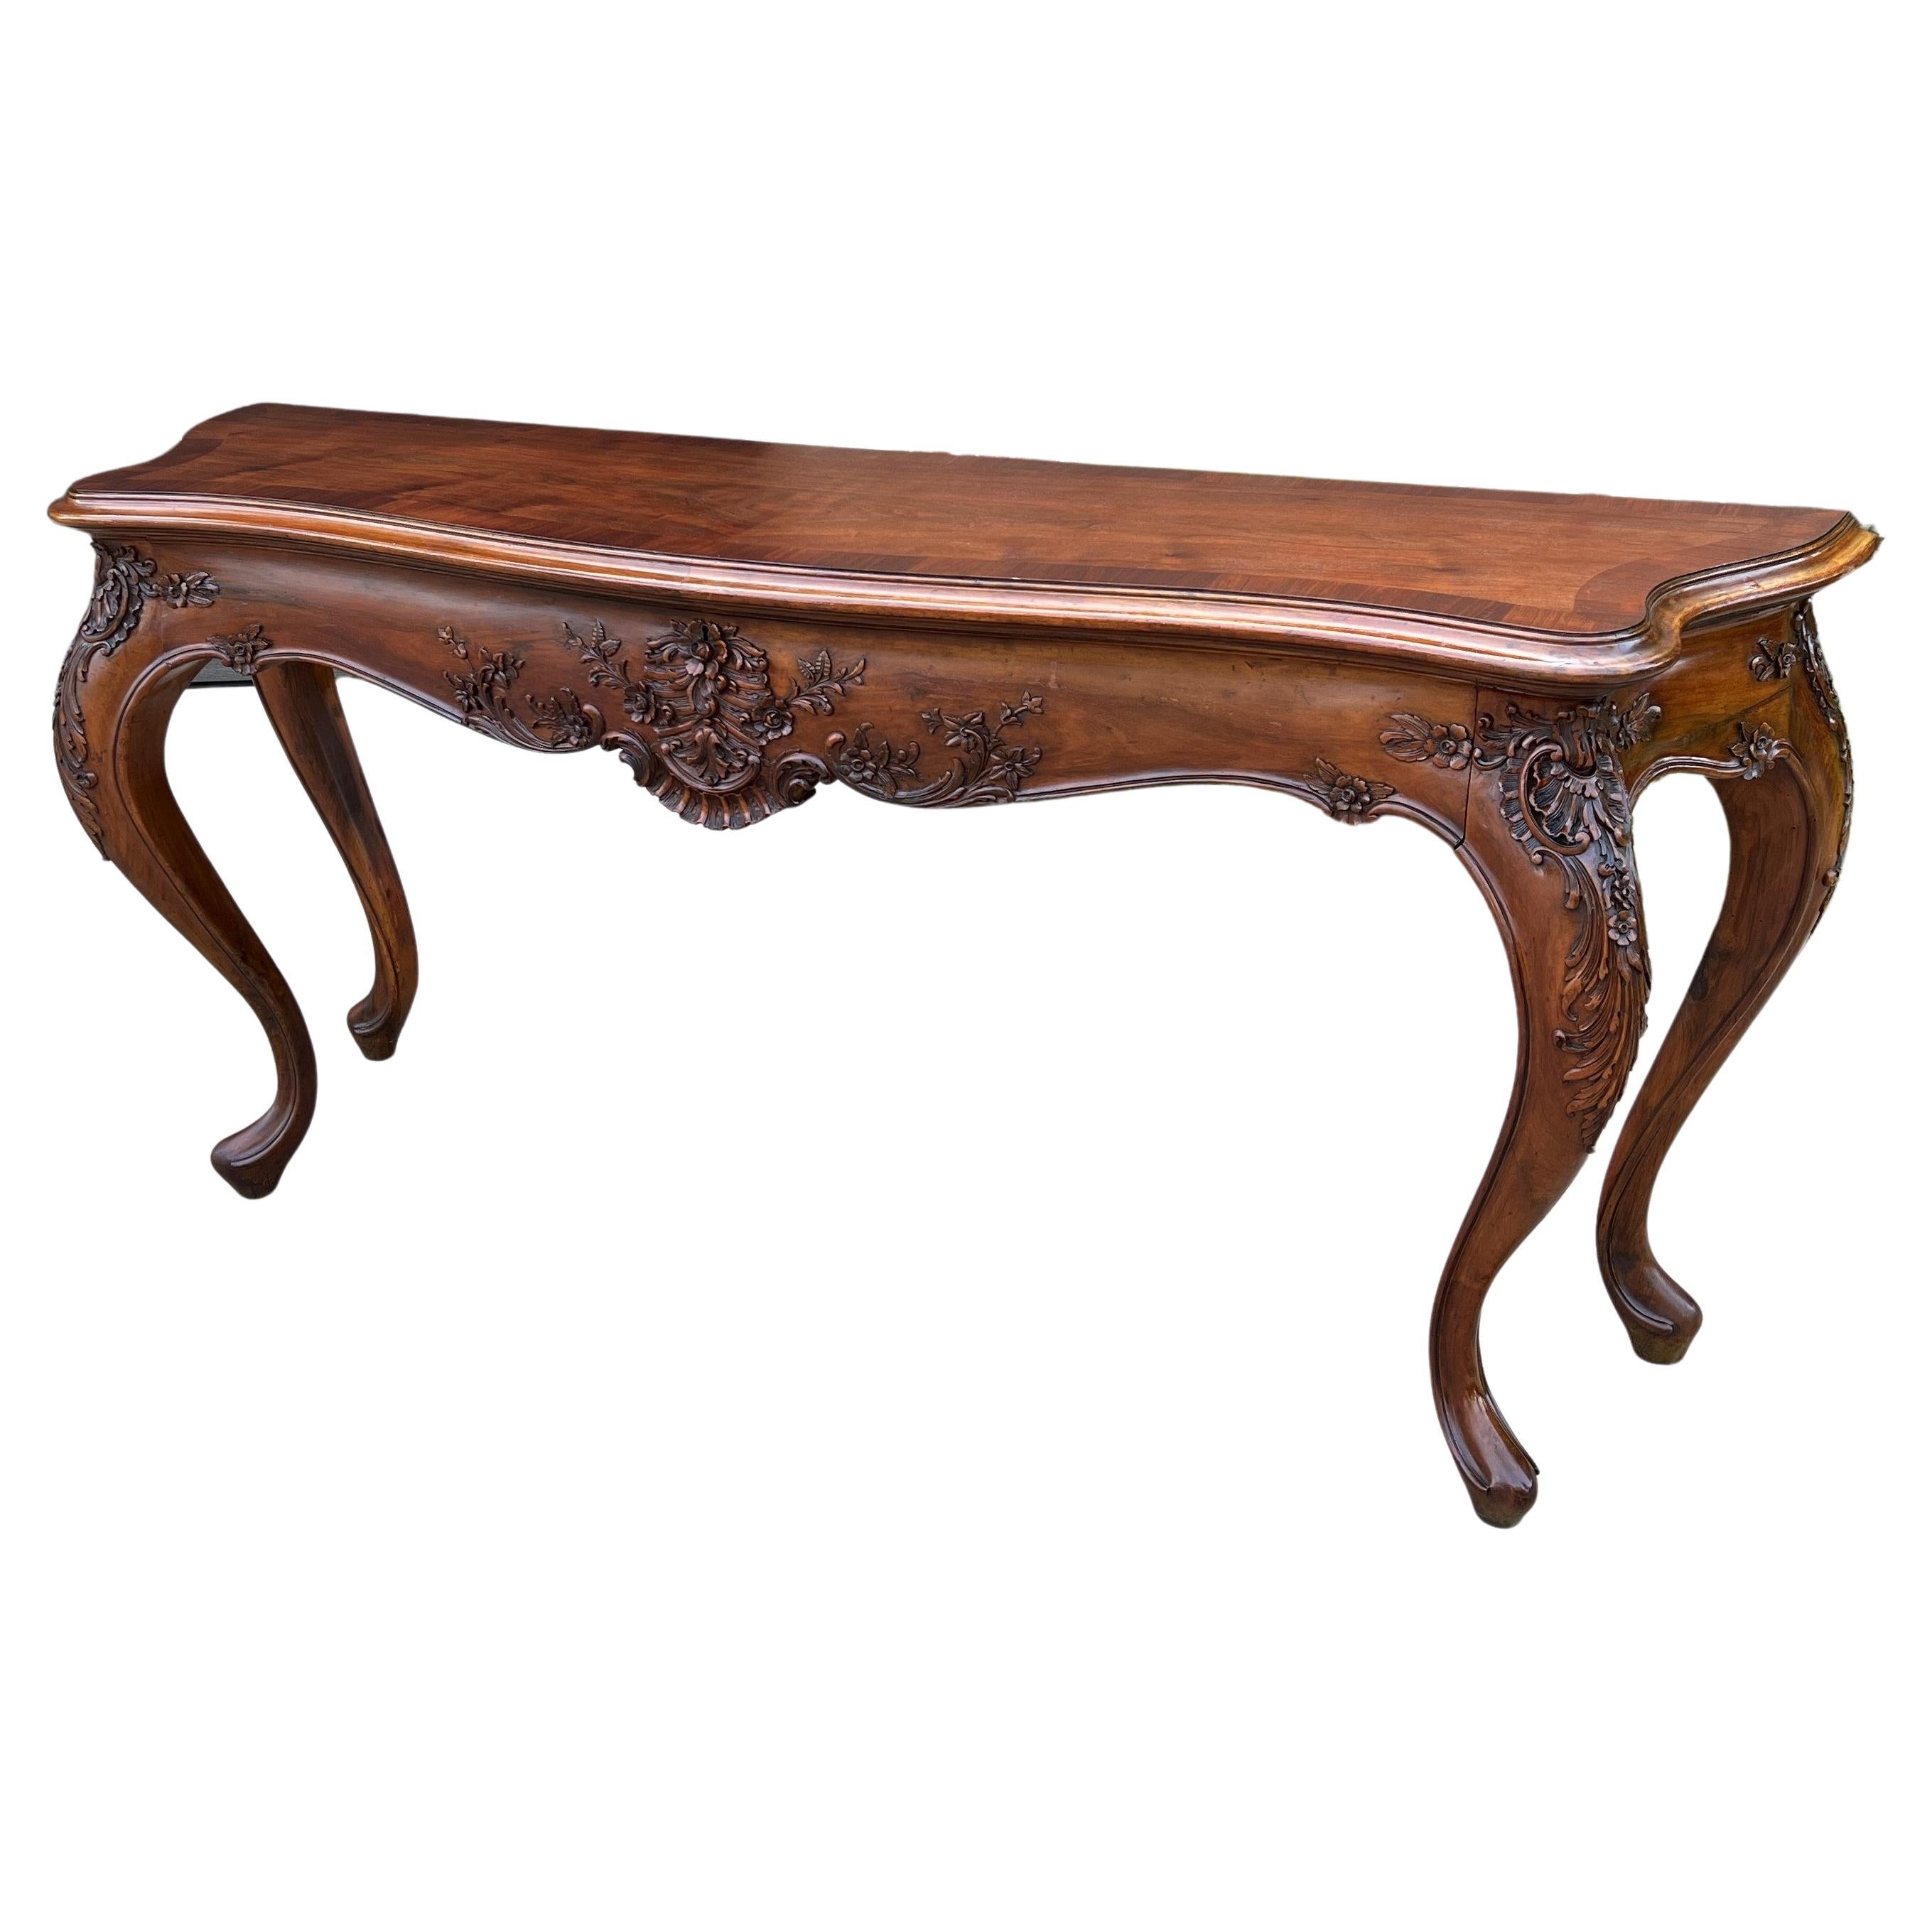 Antique French Louis XV Style Sofa Hall Entry Console Table Mahogany 77" Wide